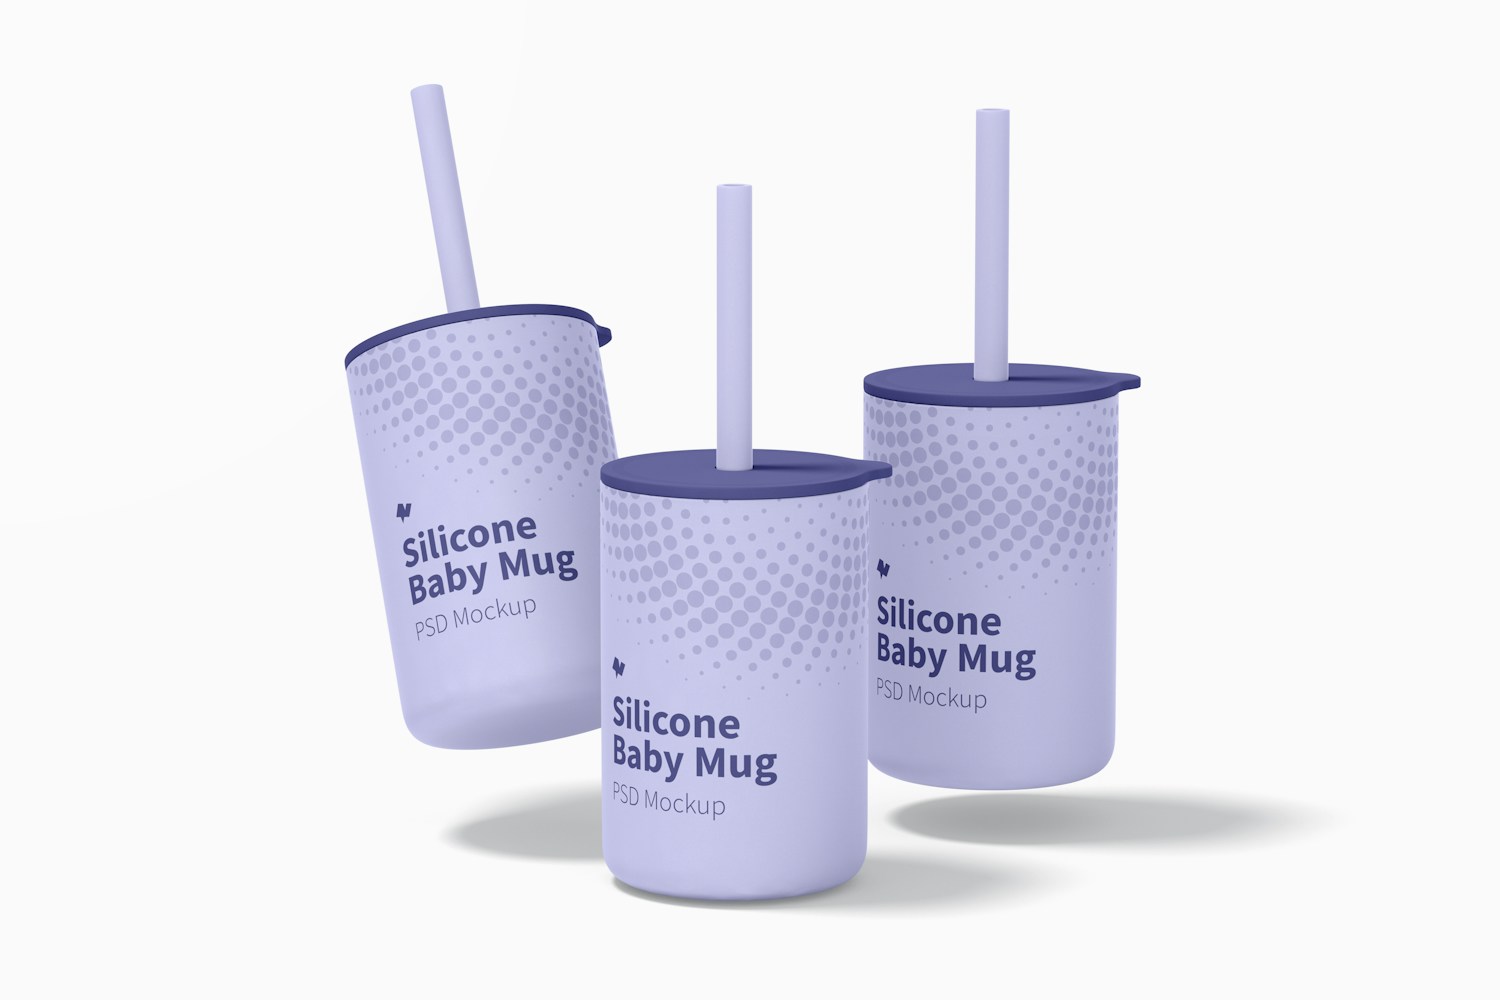 Silicone Baby Mugs with Lid Mockup, Falling